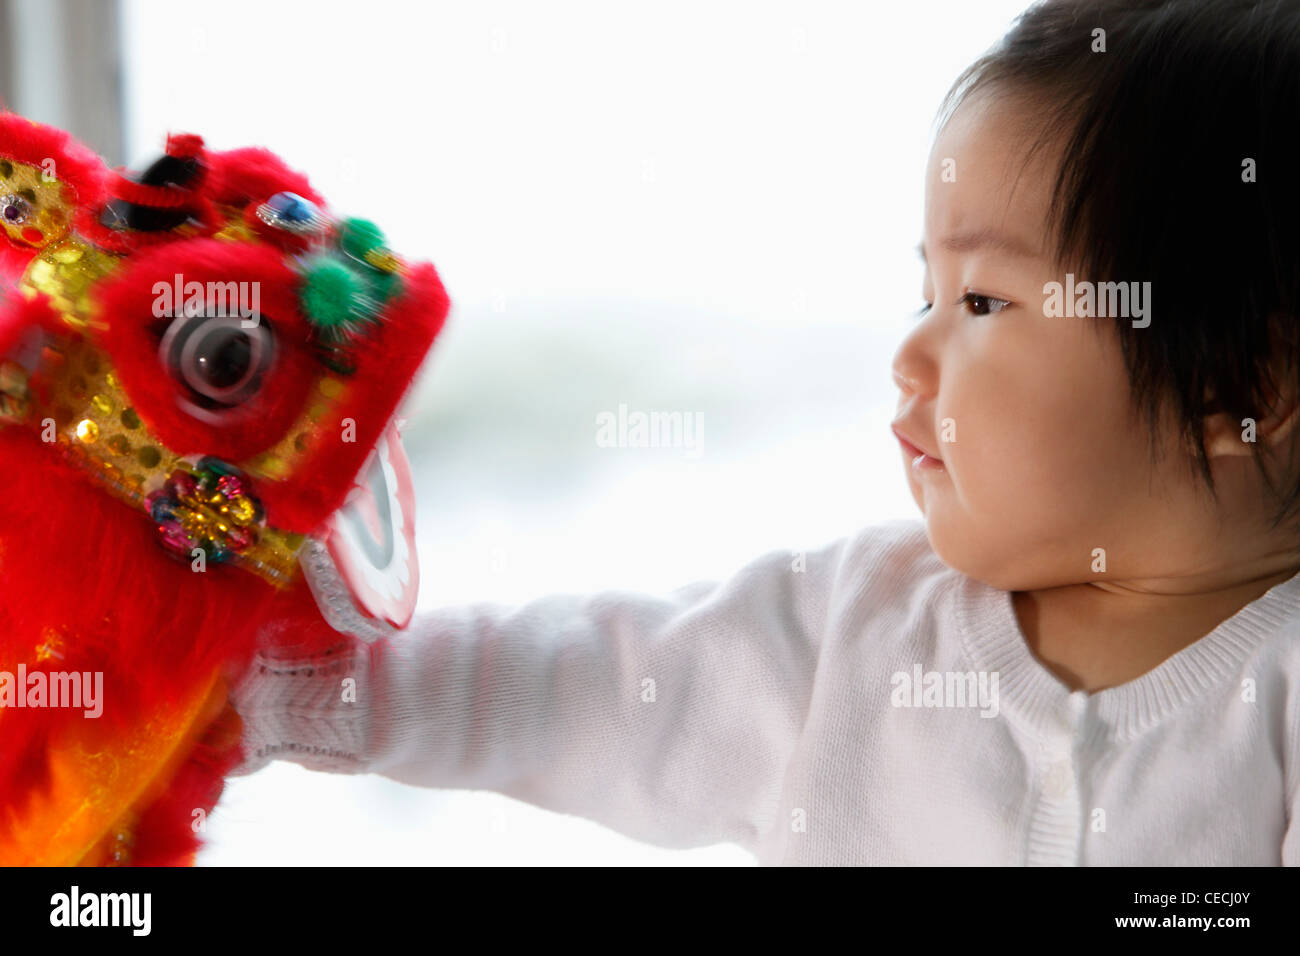 profile of baby looking at Chinese dragon toy Stock Photo